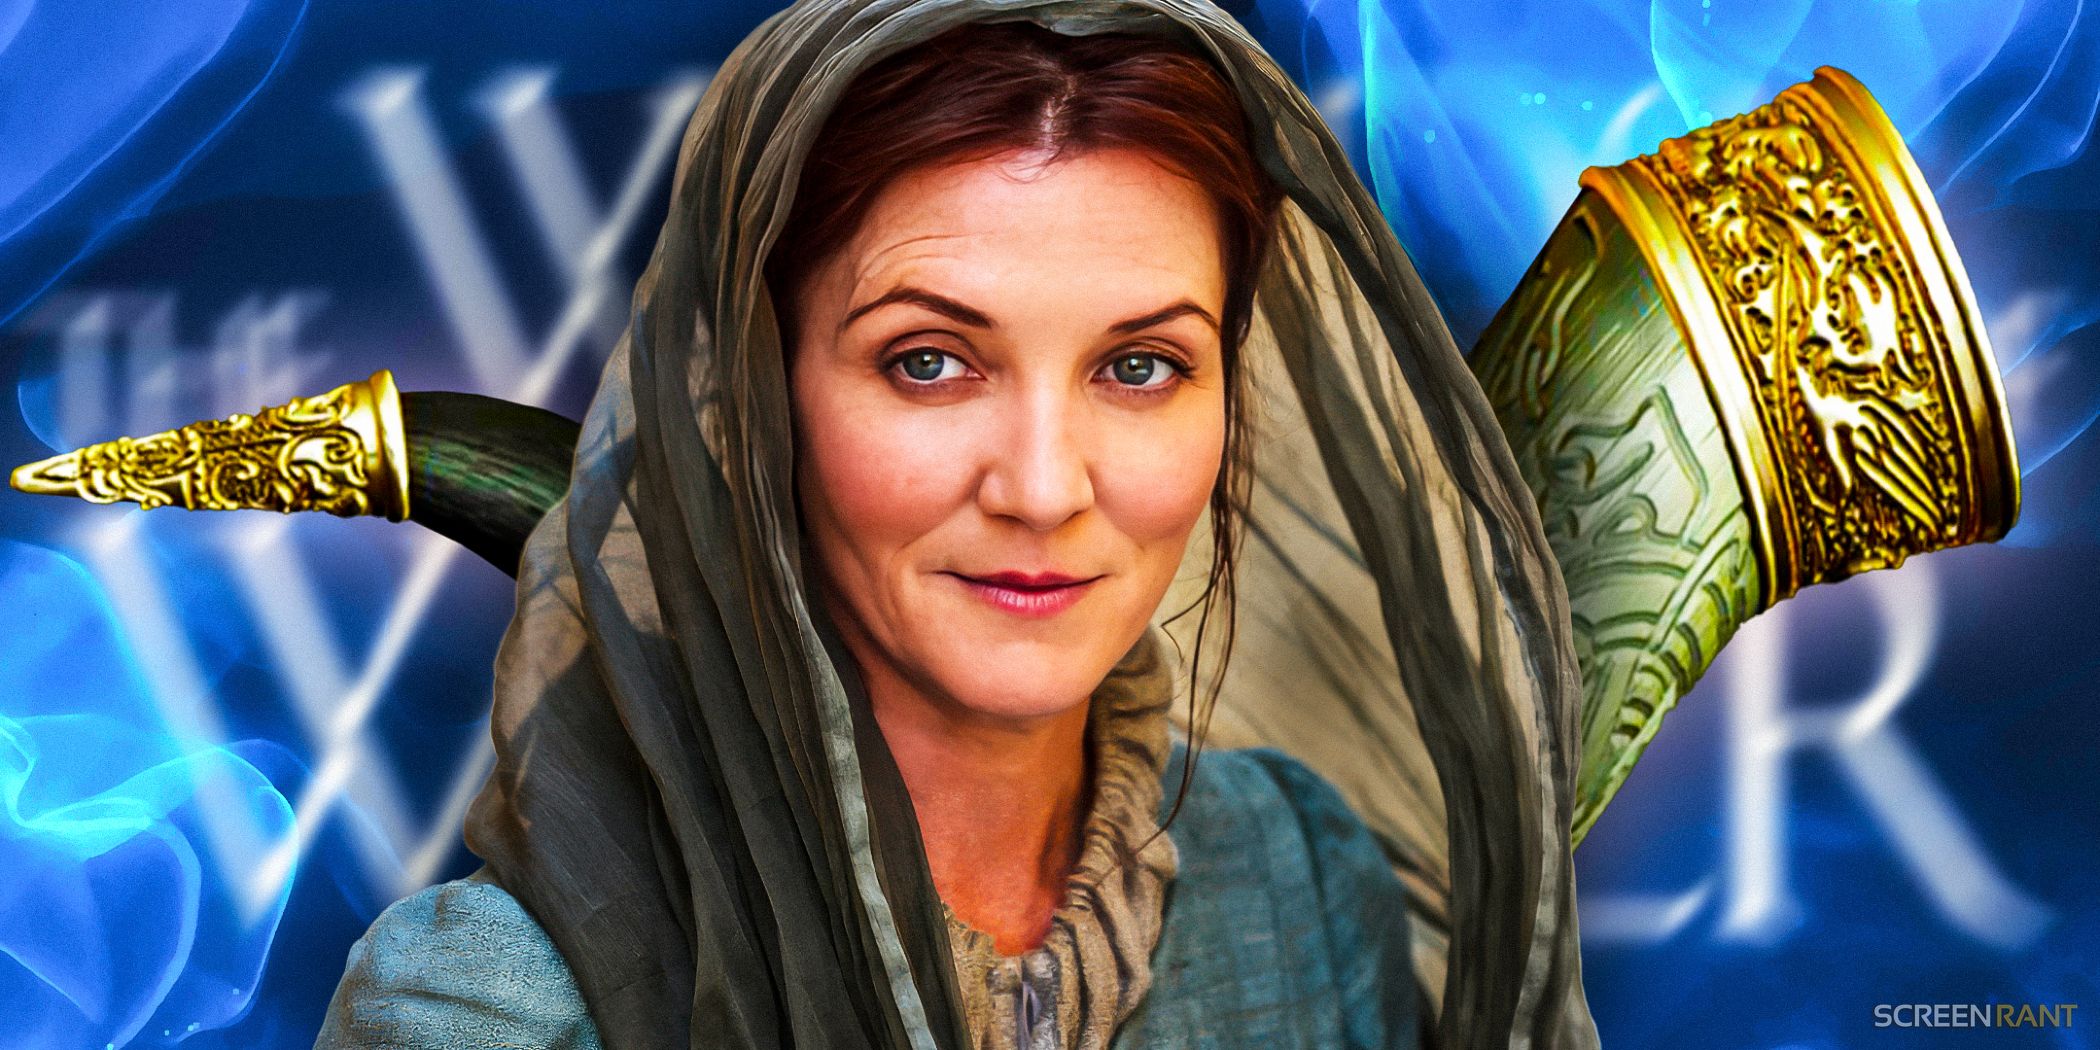 Michelle Fairley as Catelyn Stark, head covered by a scarf and with a horn in the background, in Game of Thrones